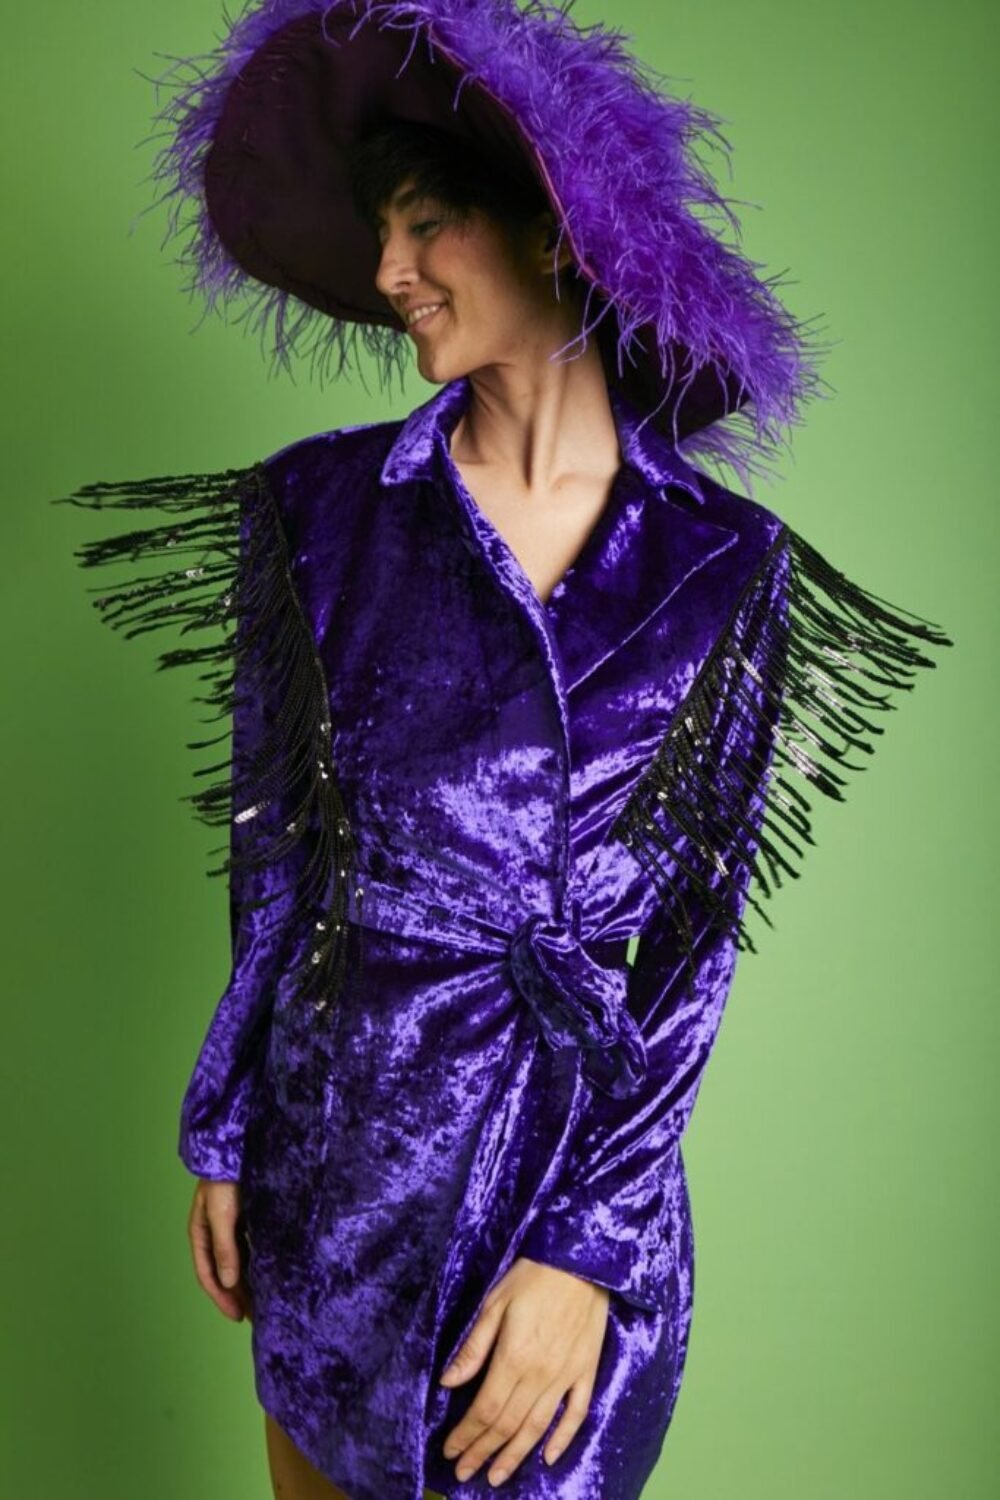 Shop Lux Purple Crushed Velvet Blazer dress with Sequin Tassels and women's luxury and designer clothes at www.lux-apparel.co.uk